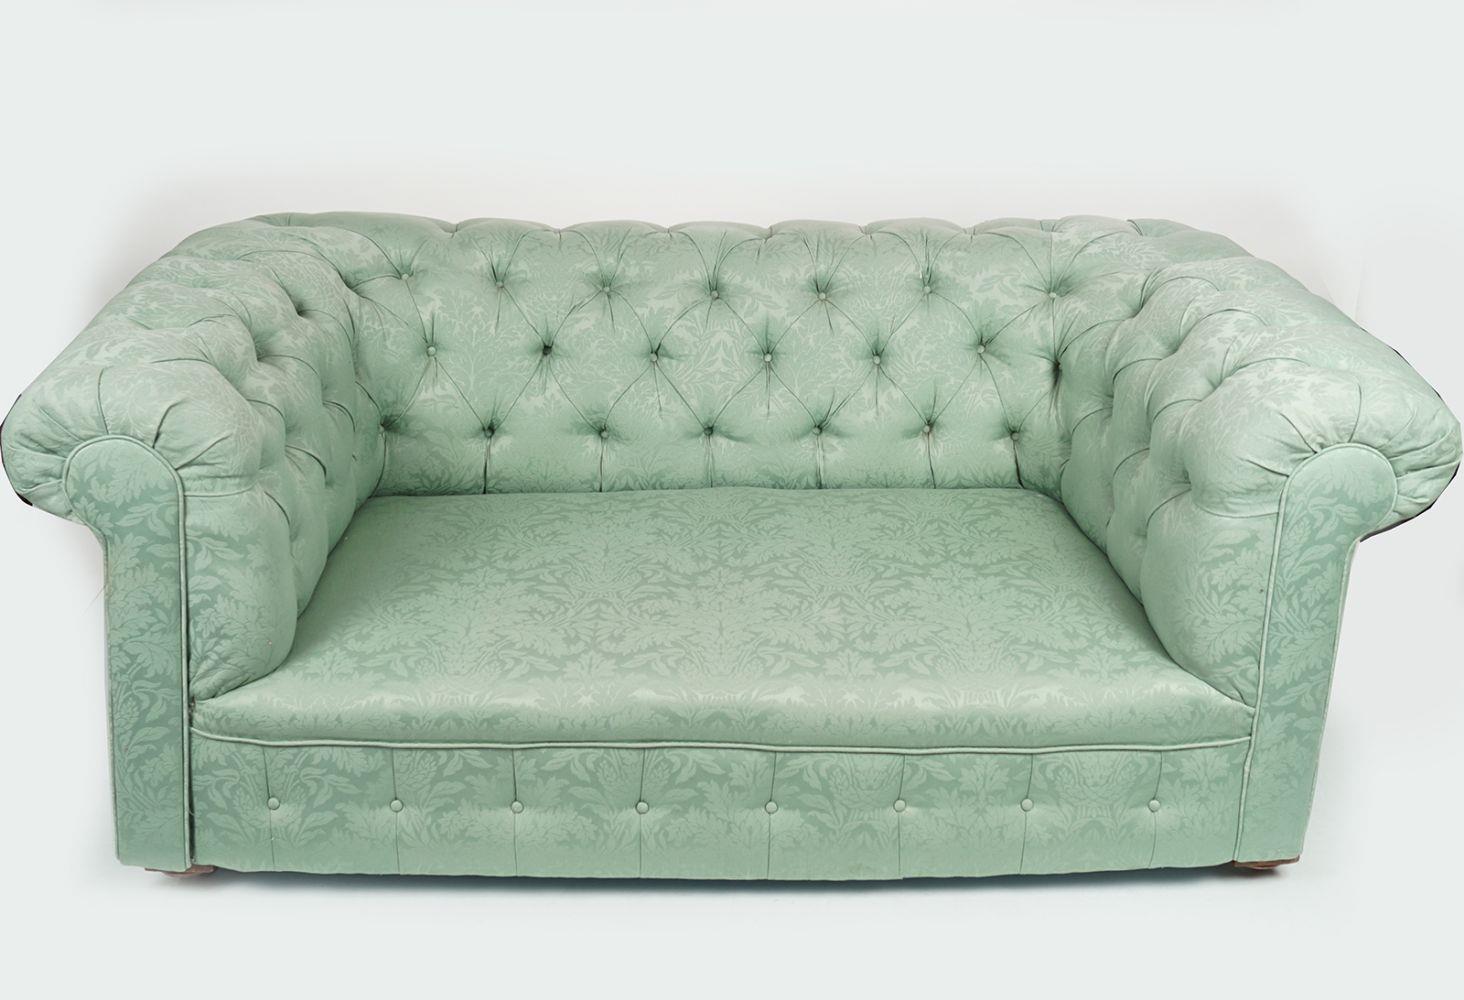 PAIR 19TH-CENTURY ROLL BACK CHESTERFIELD SETTEES